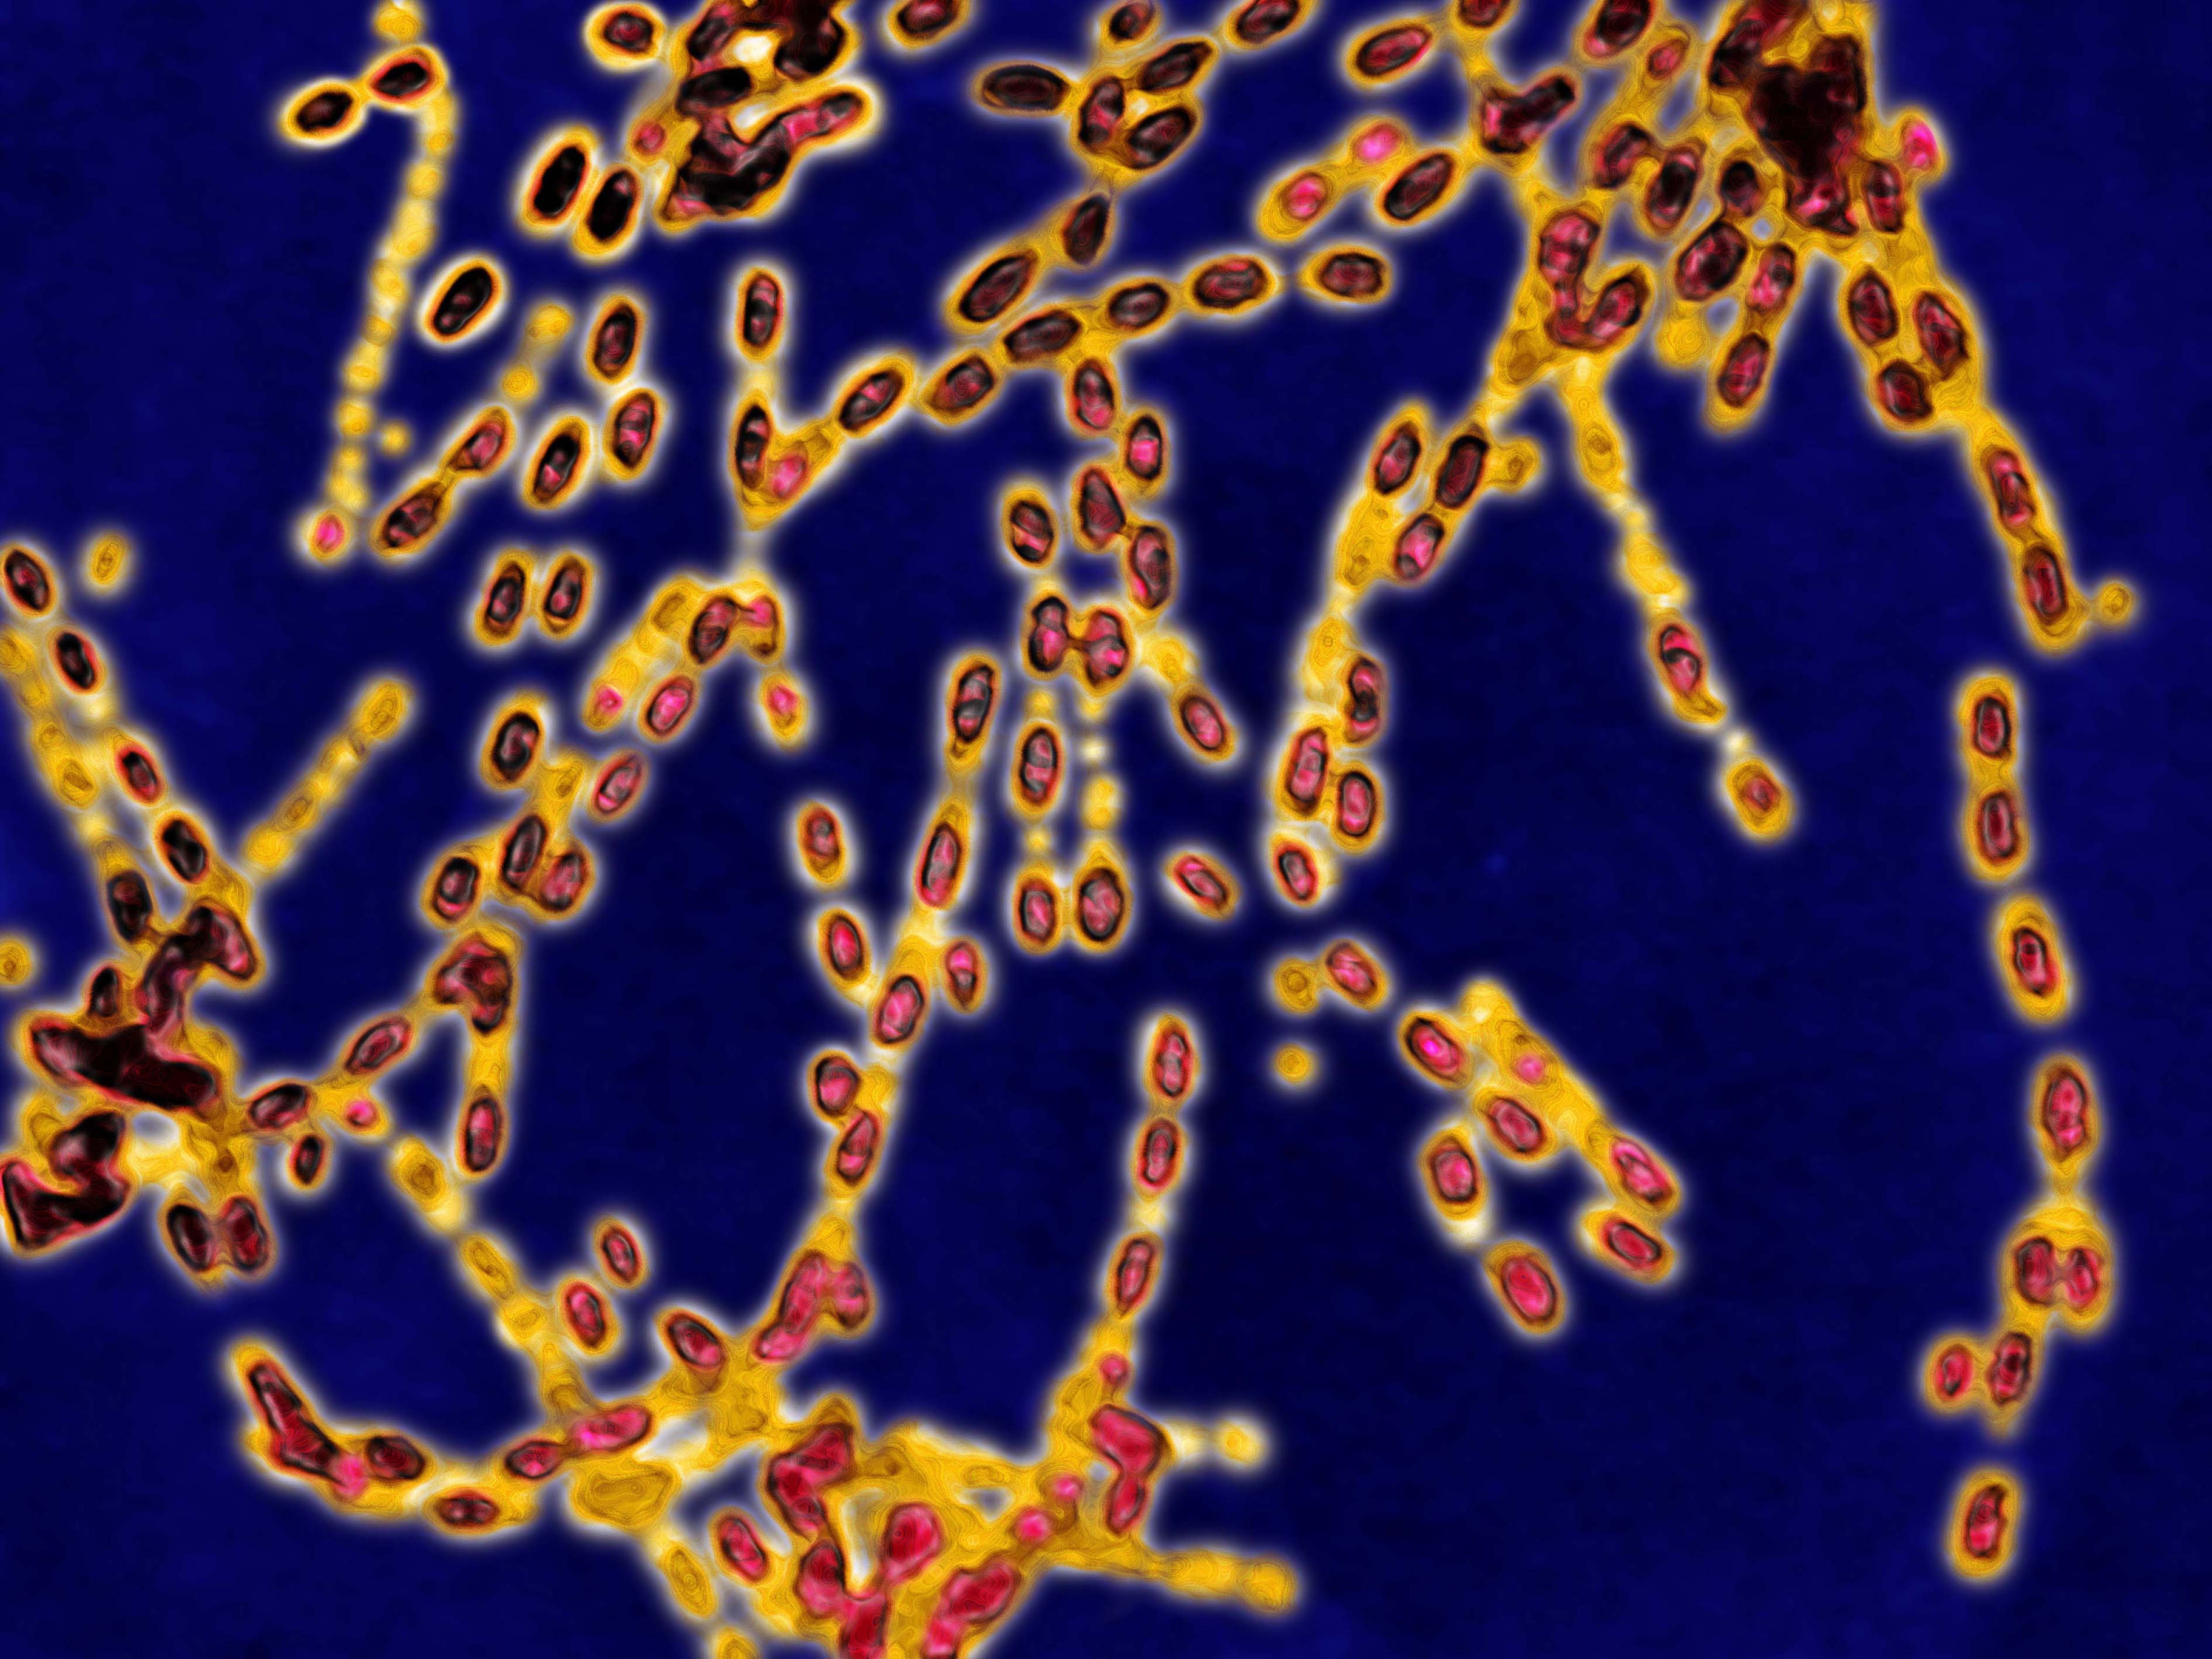 Anthrax Bacterium (BSIP/UIG//Universal Images Group/Getty Images)